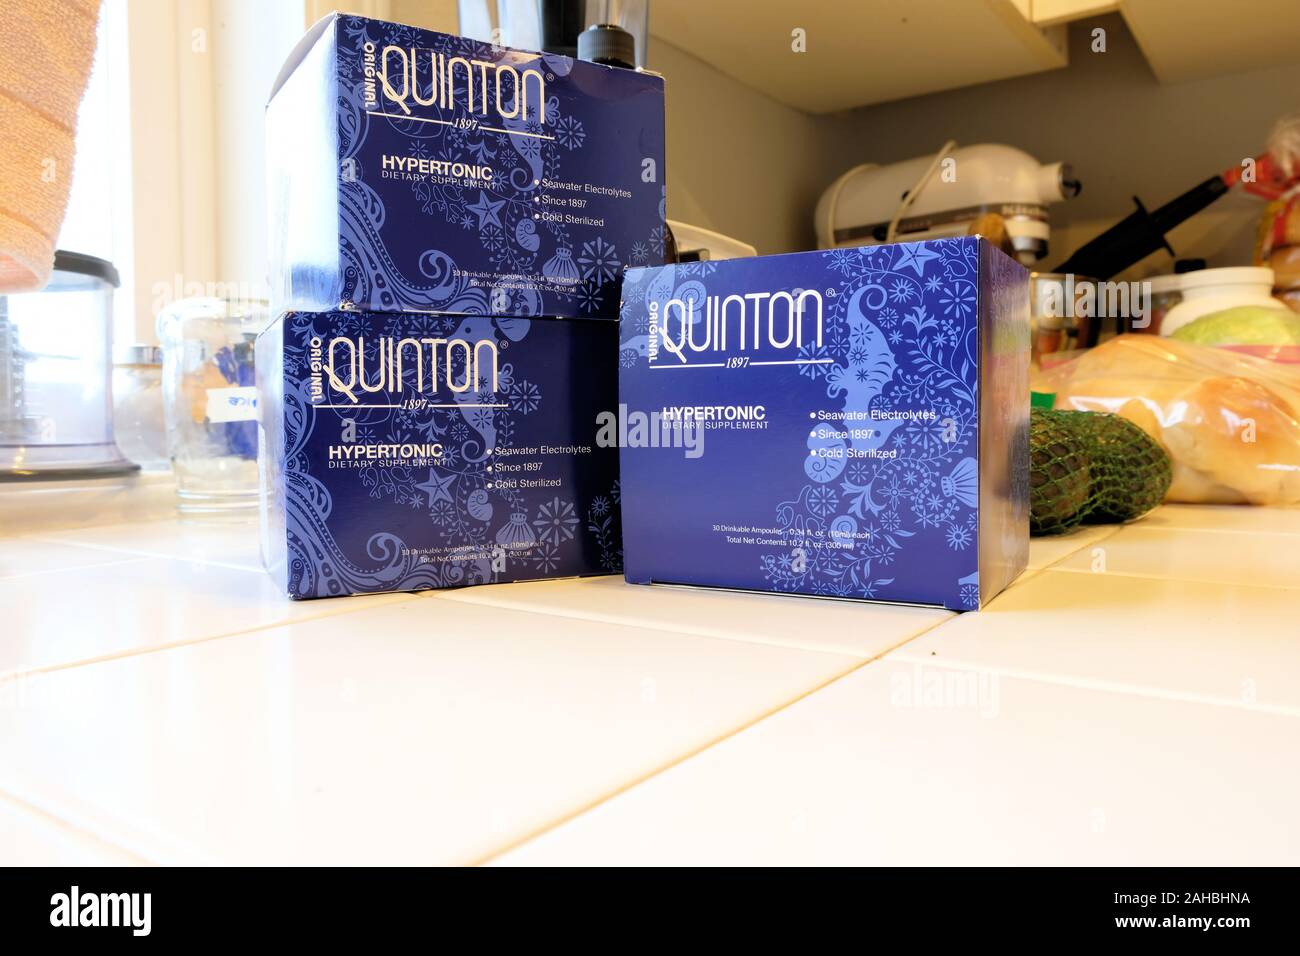 https://c8.alamy.com/comp/2AHBHNA/three-boxes-of-quinton-hypertonic-concentrated-supplement-pure-seawater-electrolyte-liquid-minerals-for-athletic-performance-energy-support-2AHBHNA.jpg